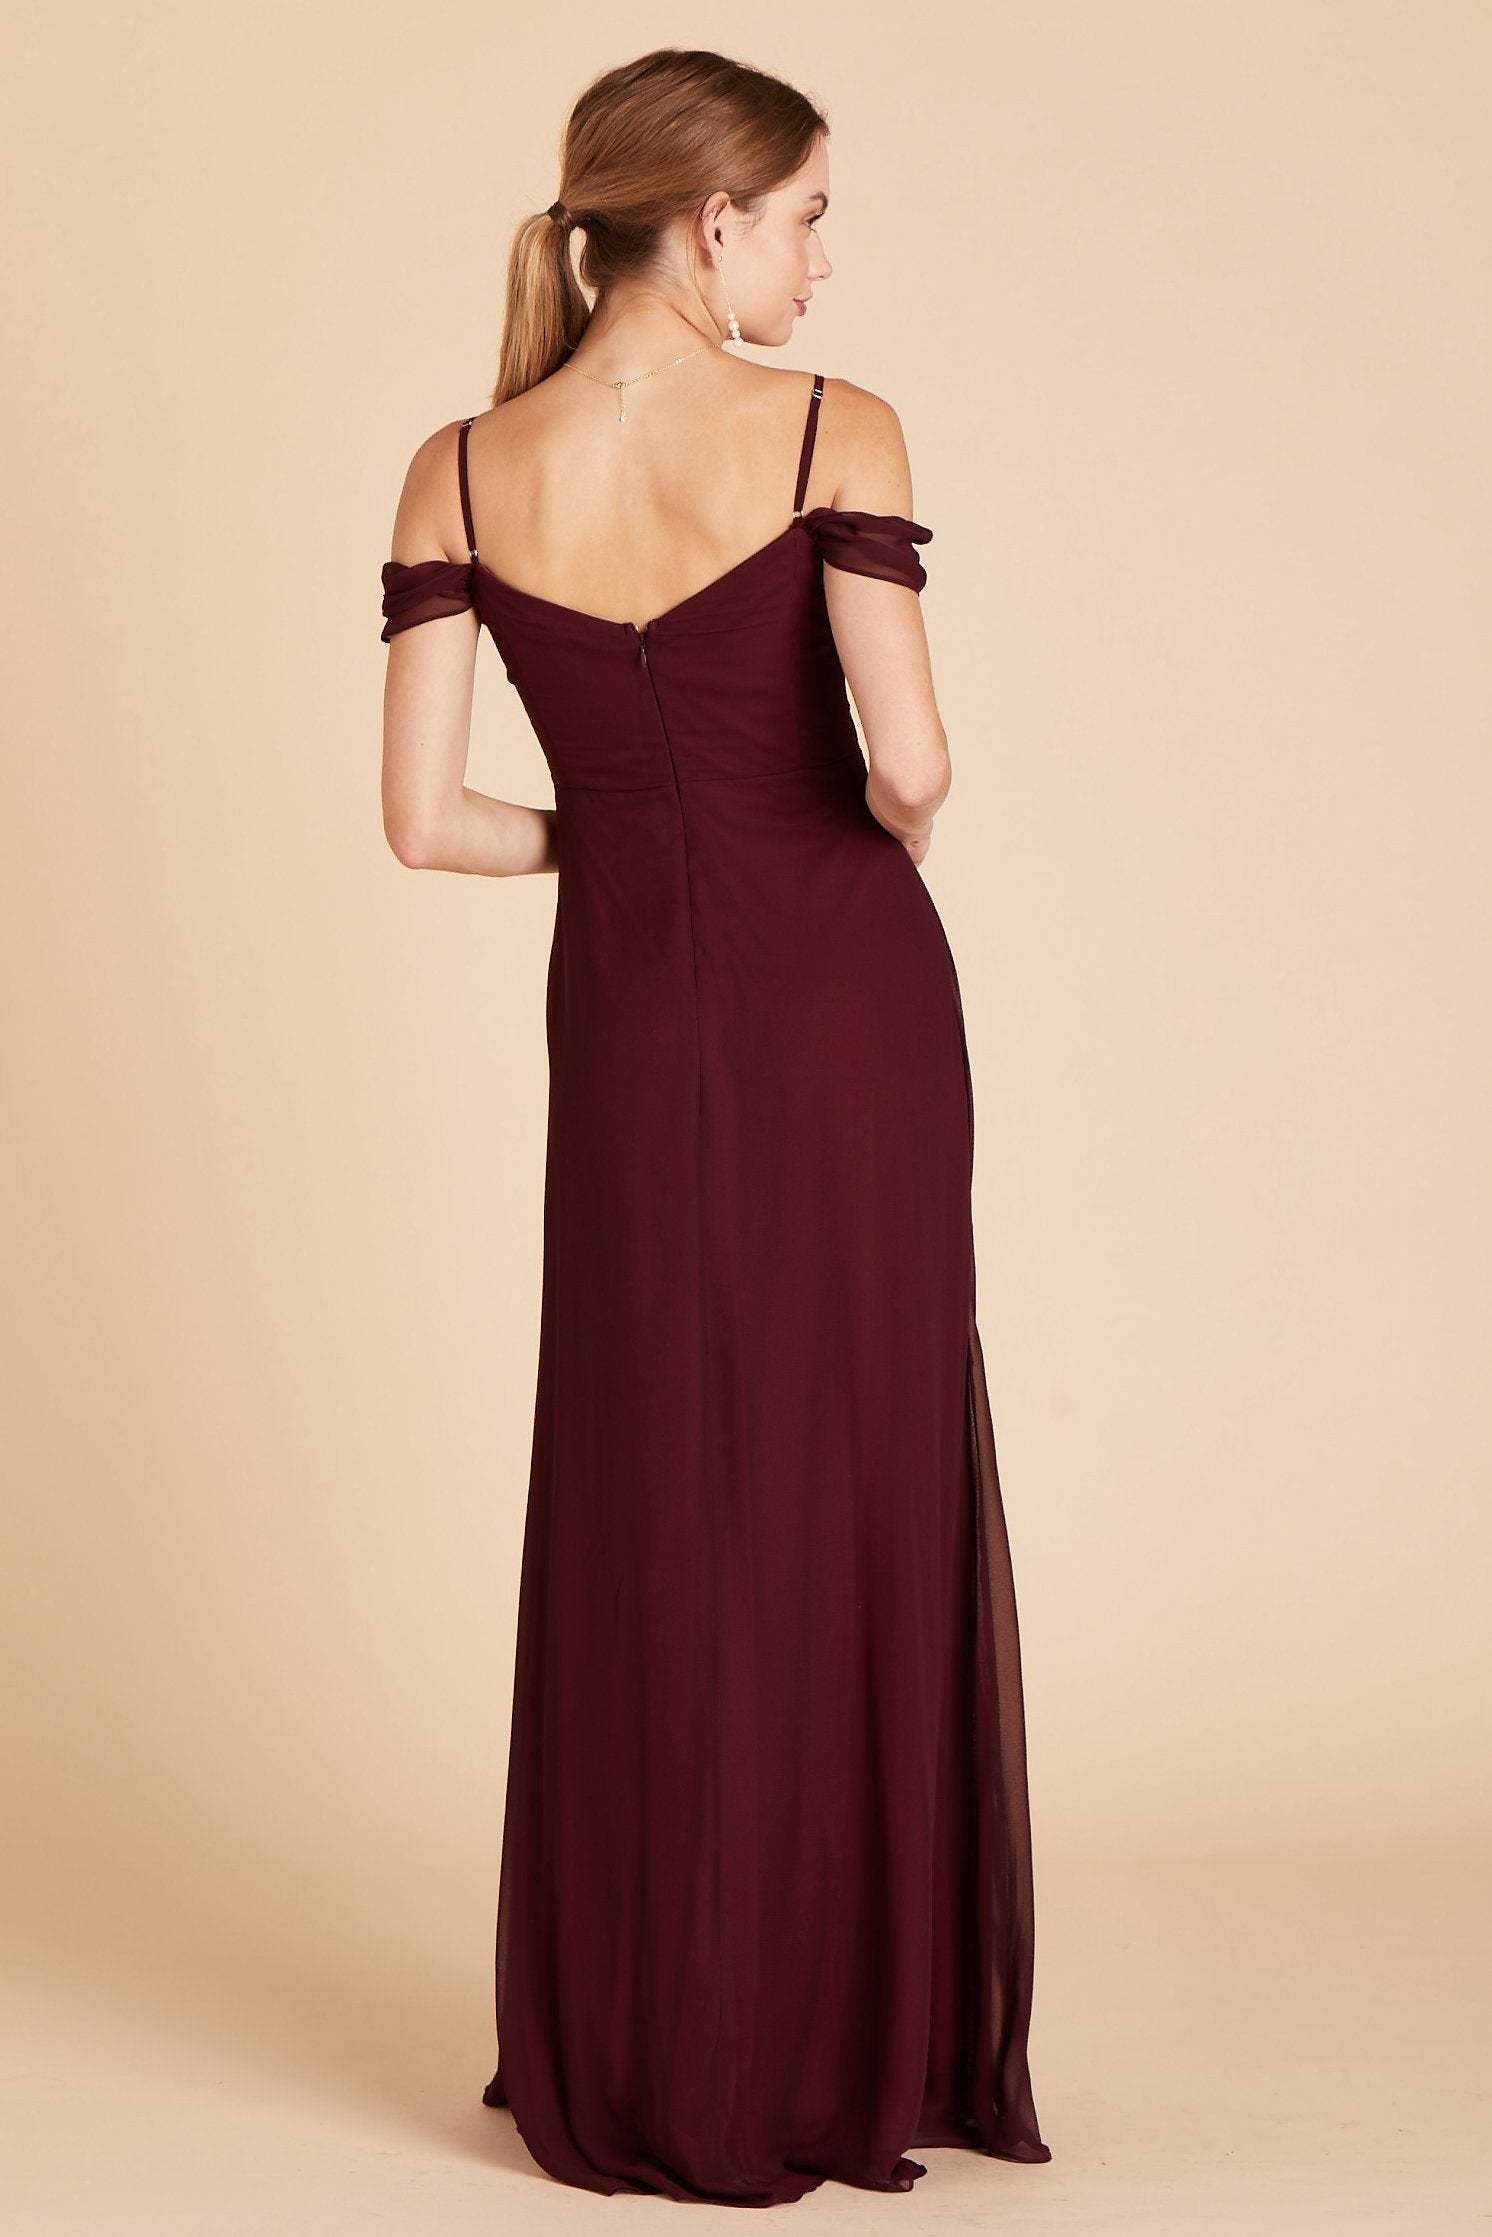 Spence convertible bridesmaid dress in cabernet burgundy chiffon by Birdy Grey, back view